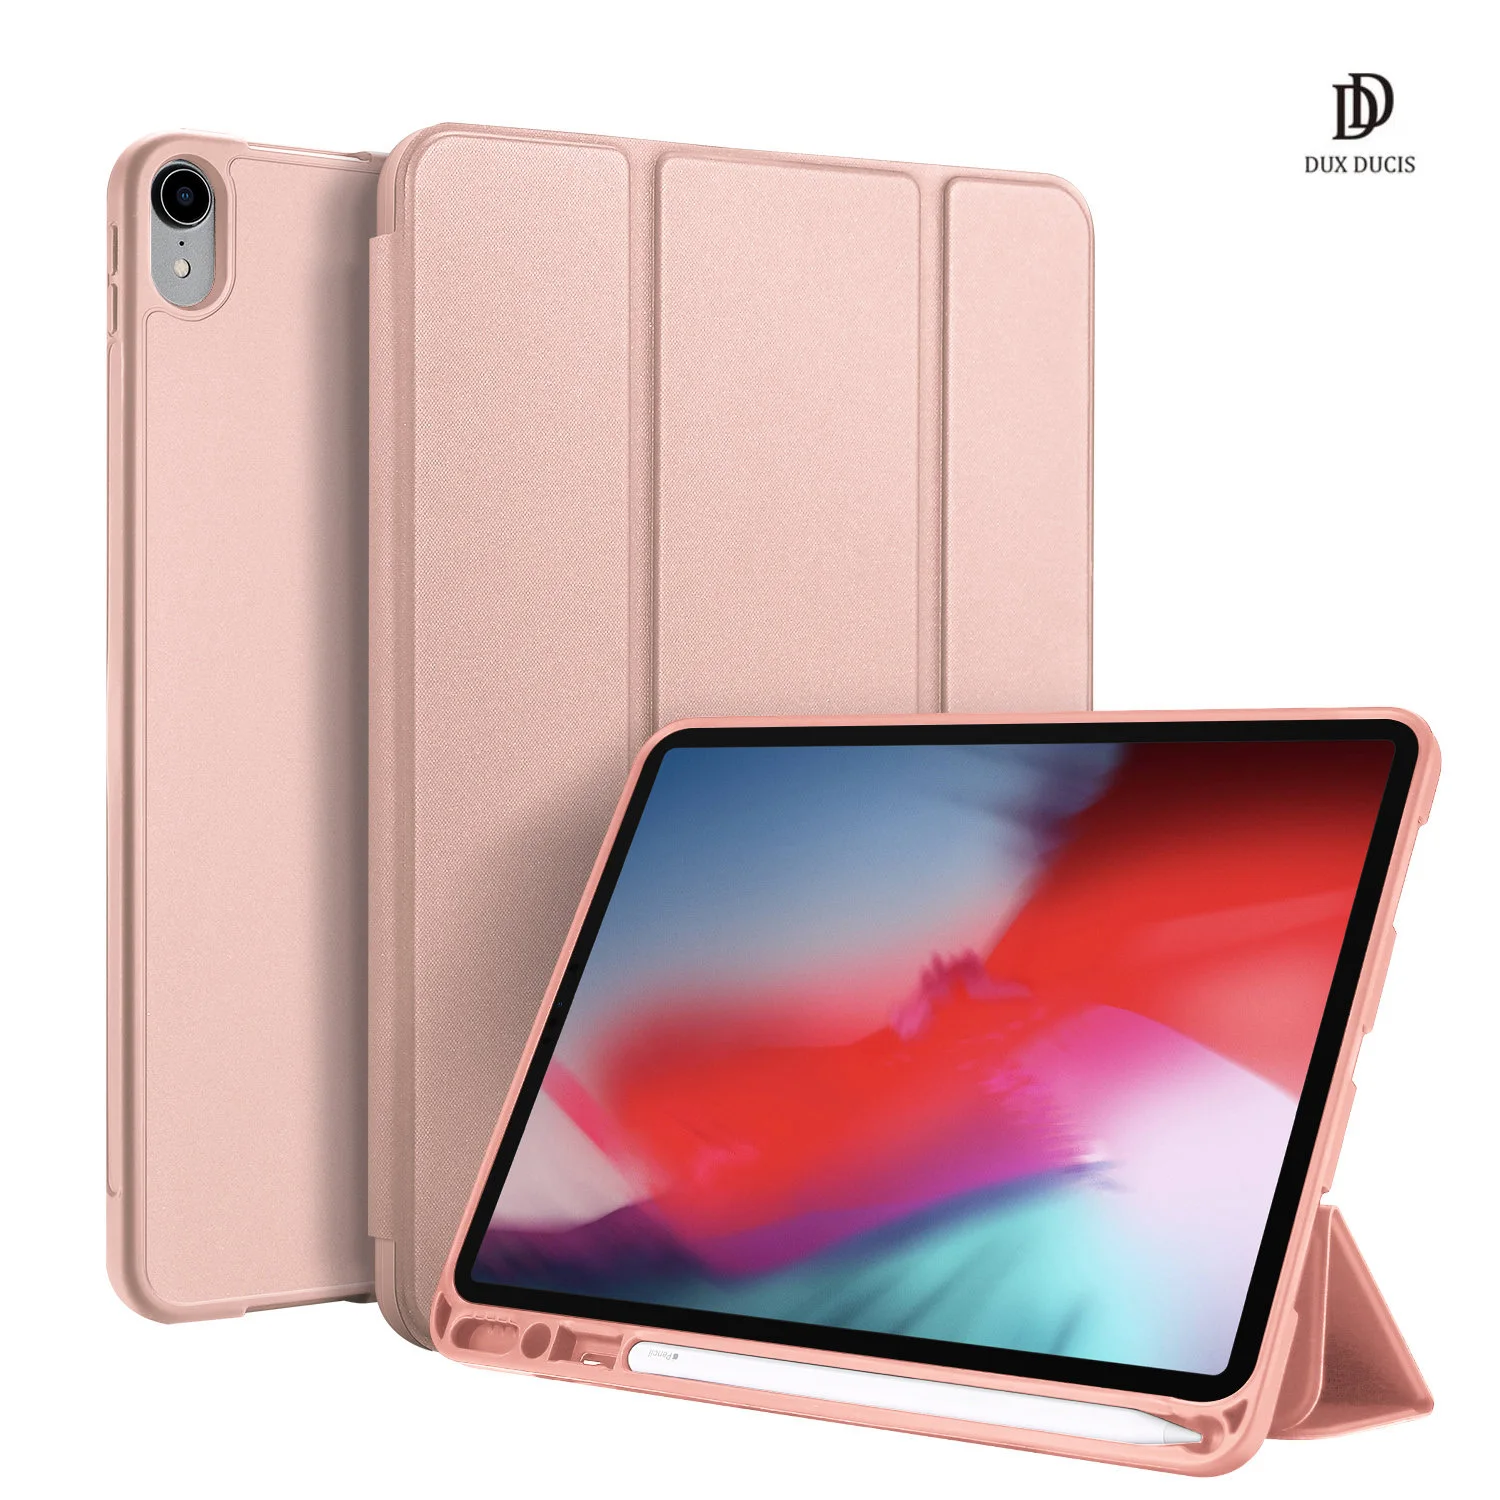 

Tablet Leather Case For iPad Pro 11 2018 Smart Sleep Wake DUX DUCIS OSOM Series with Pencil Holder Trifold Stand Clear Back